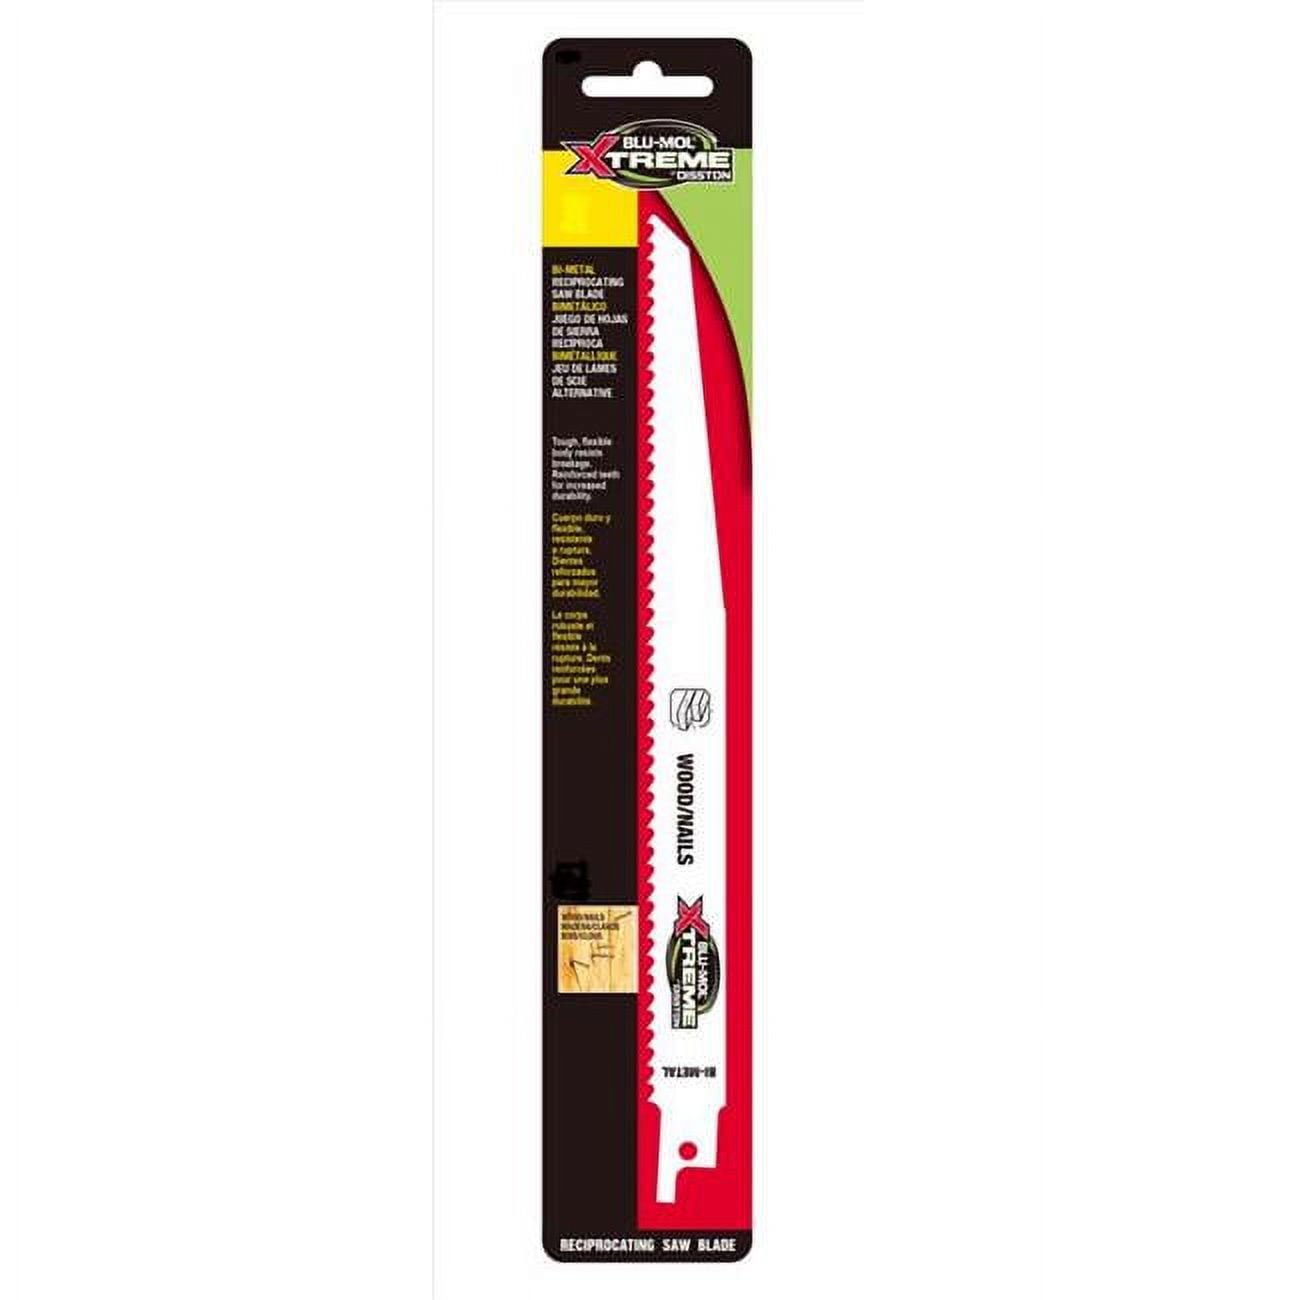 Picture of Blumol 2033637 Xtreme 8 in. Bi-Metal Reciprocating Saw Blade - 0.714 TPI